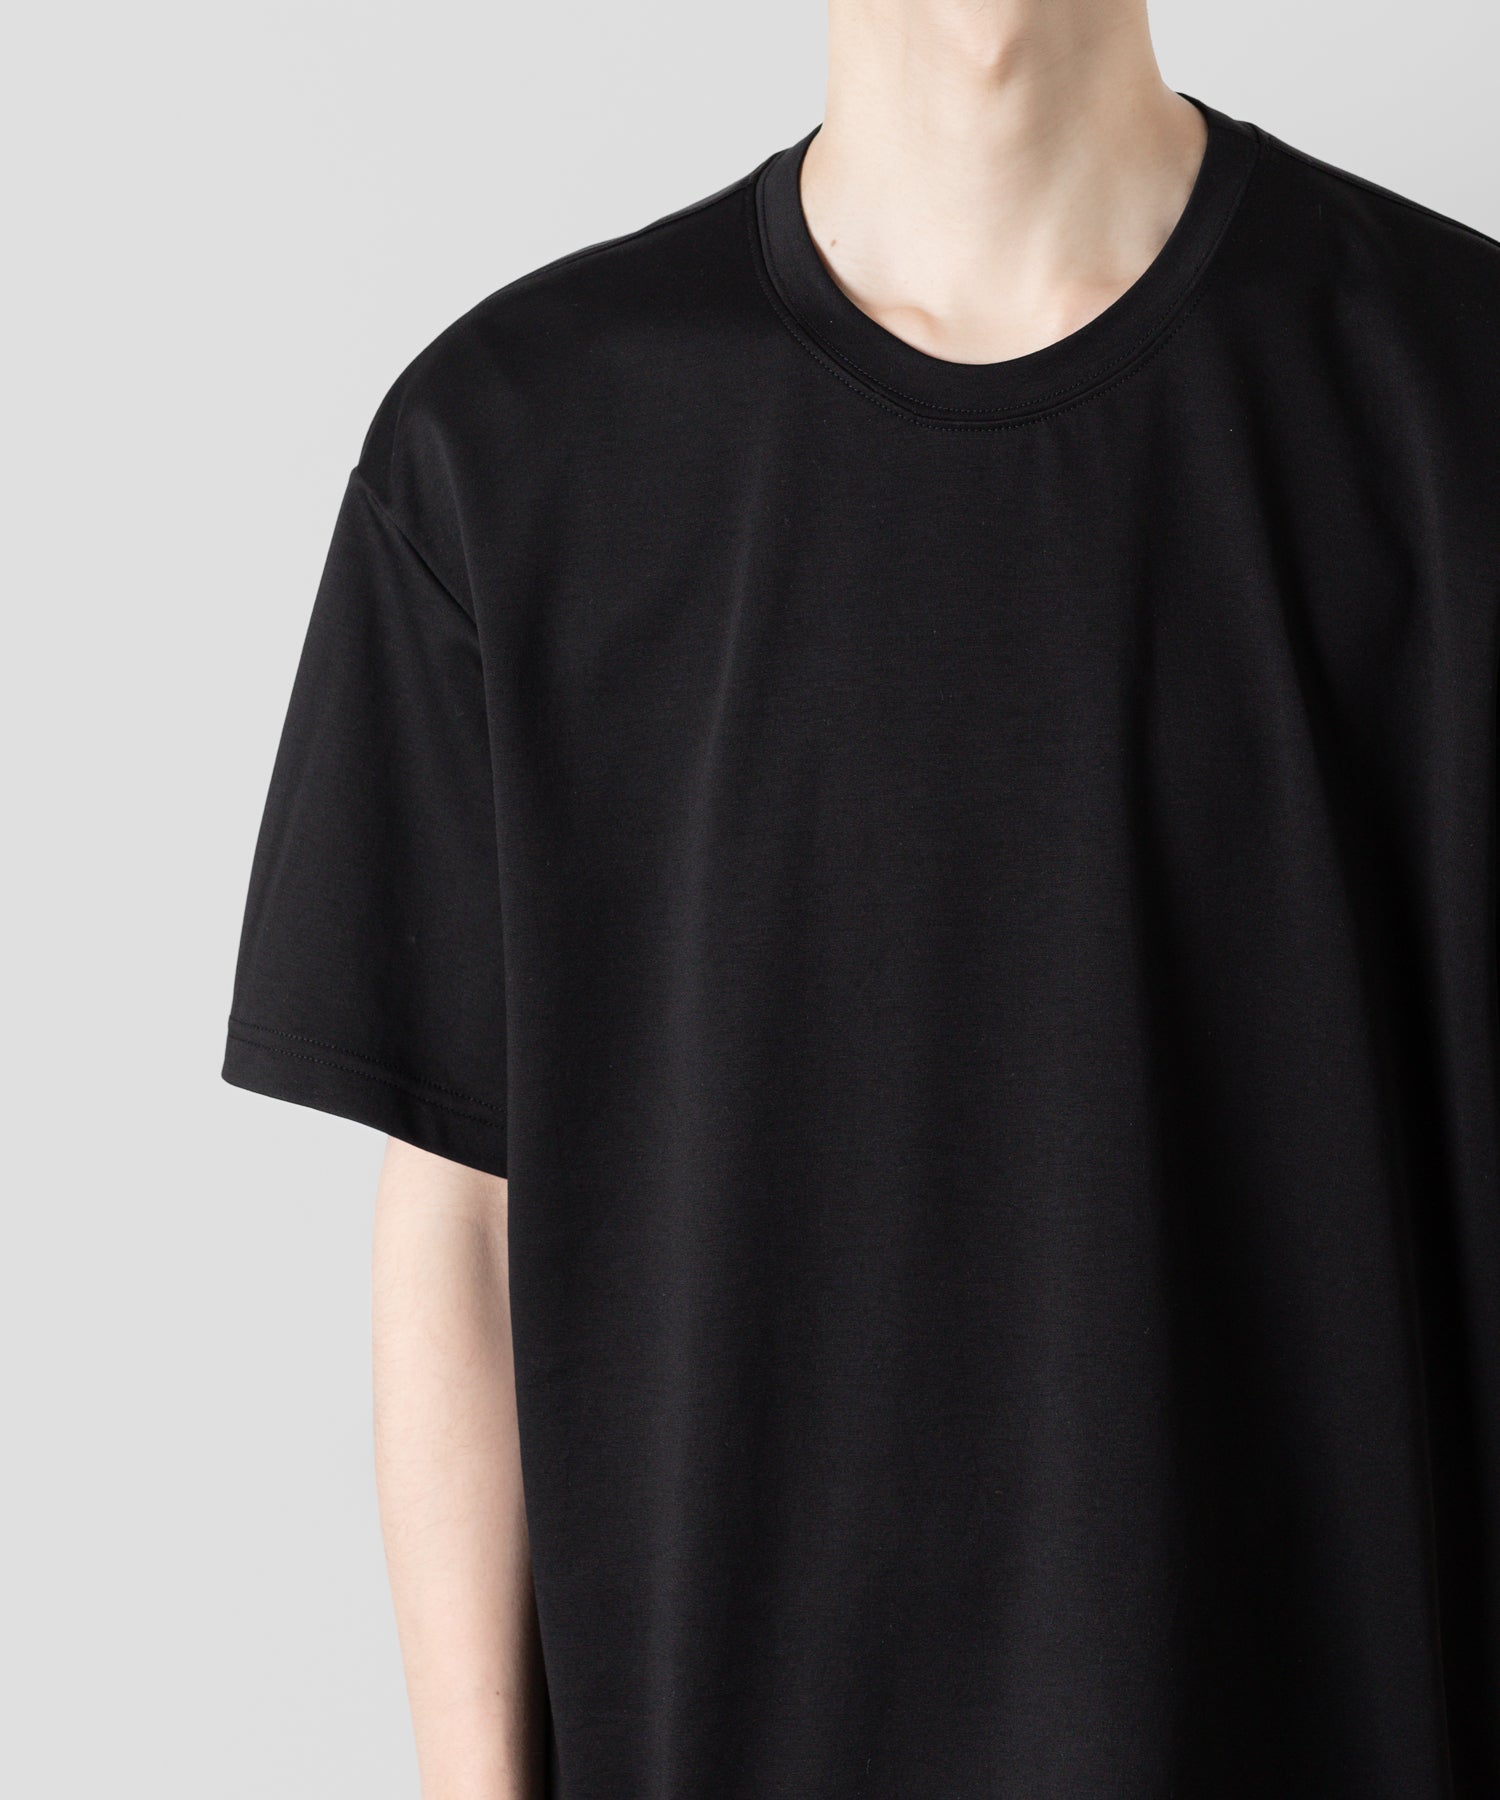 【ATTACHMENT】ATTACHMENT アタッチメントのCOTTON DOUBLE FACE OVERSIZED S/S TEE - BLACK 公式通販サイトsession福岡セレクトショップ